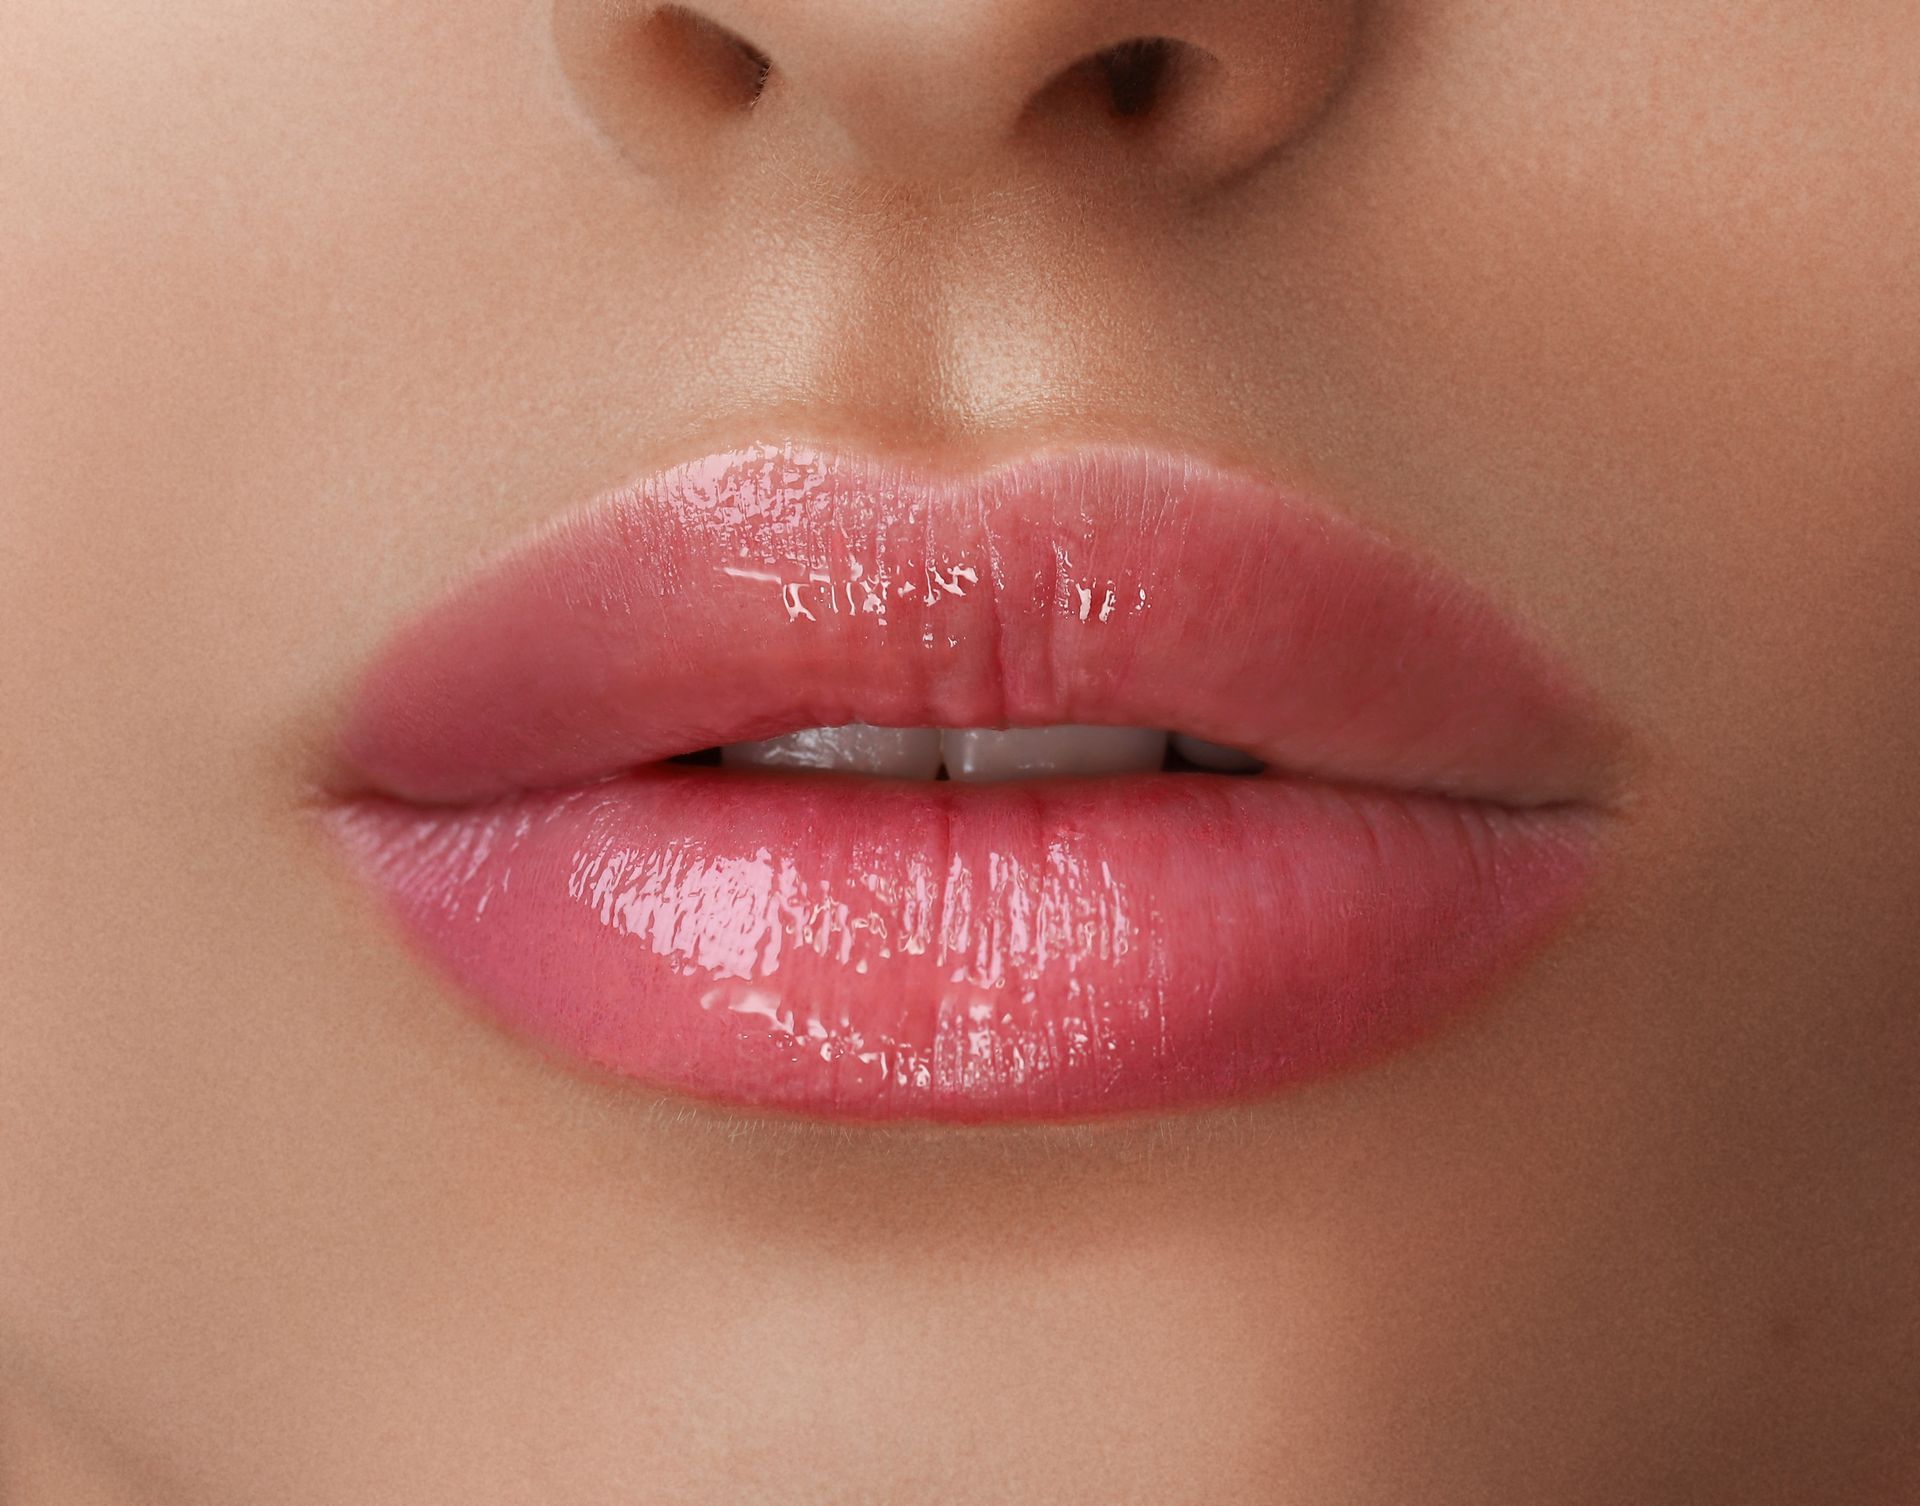 A close up of a woman 's lips with pink lipstick.